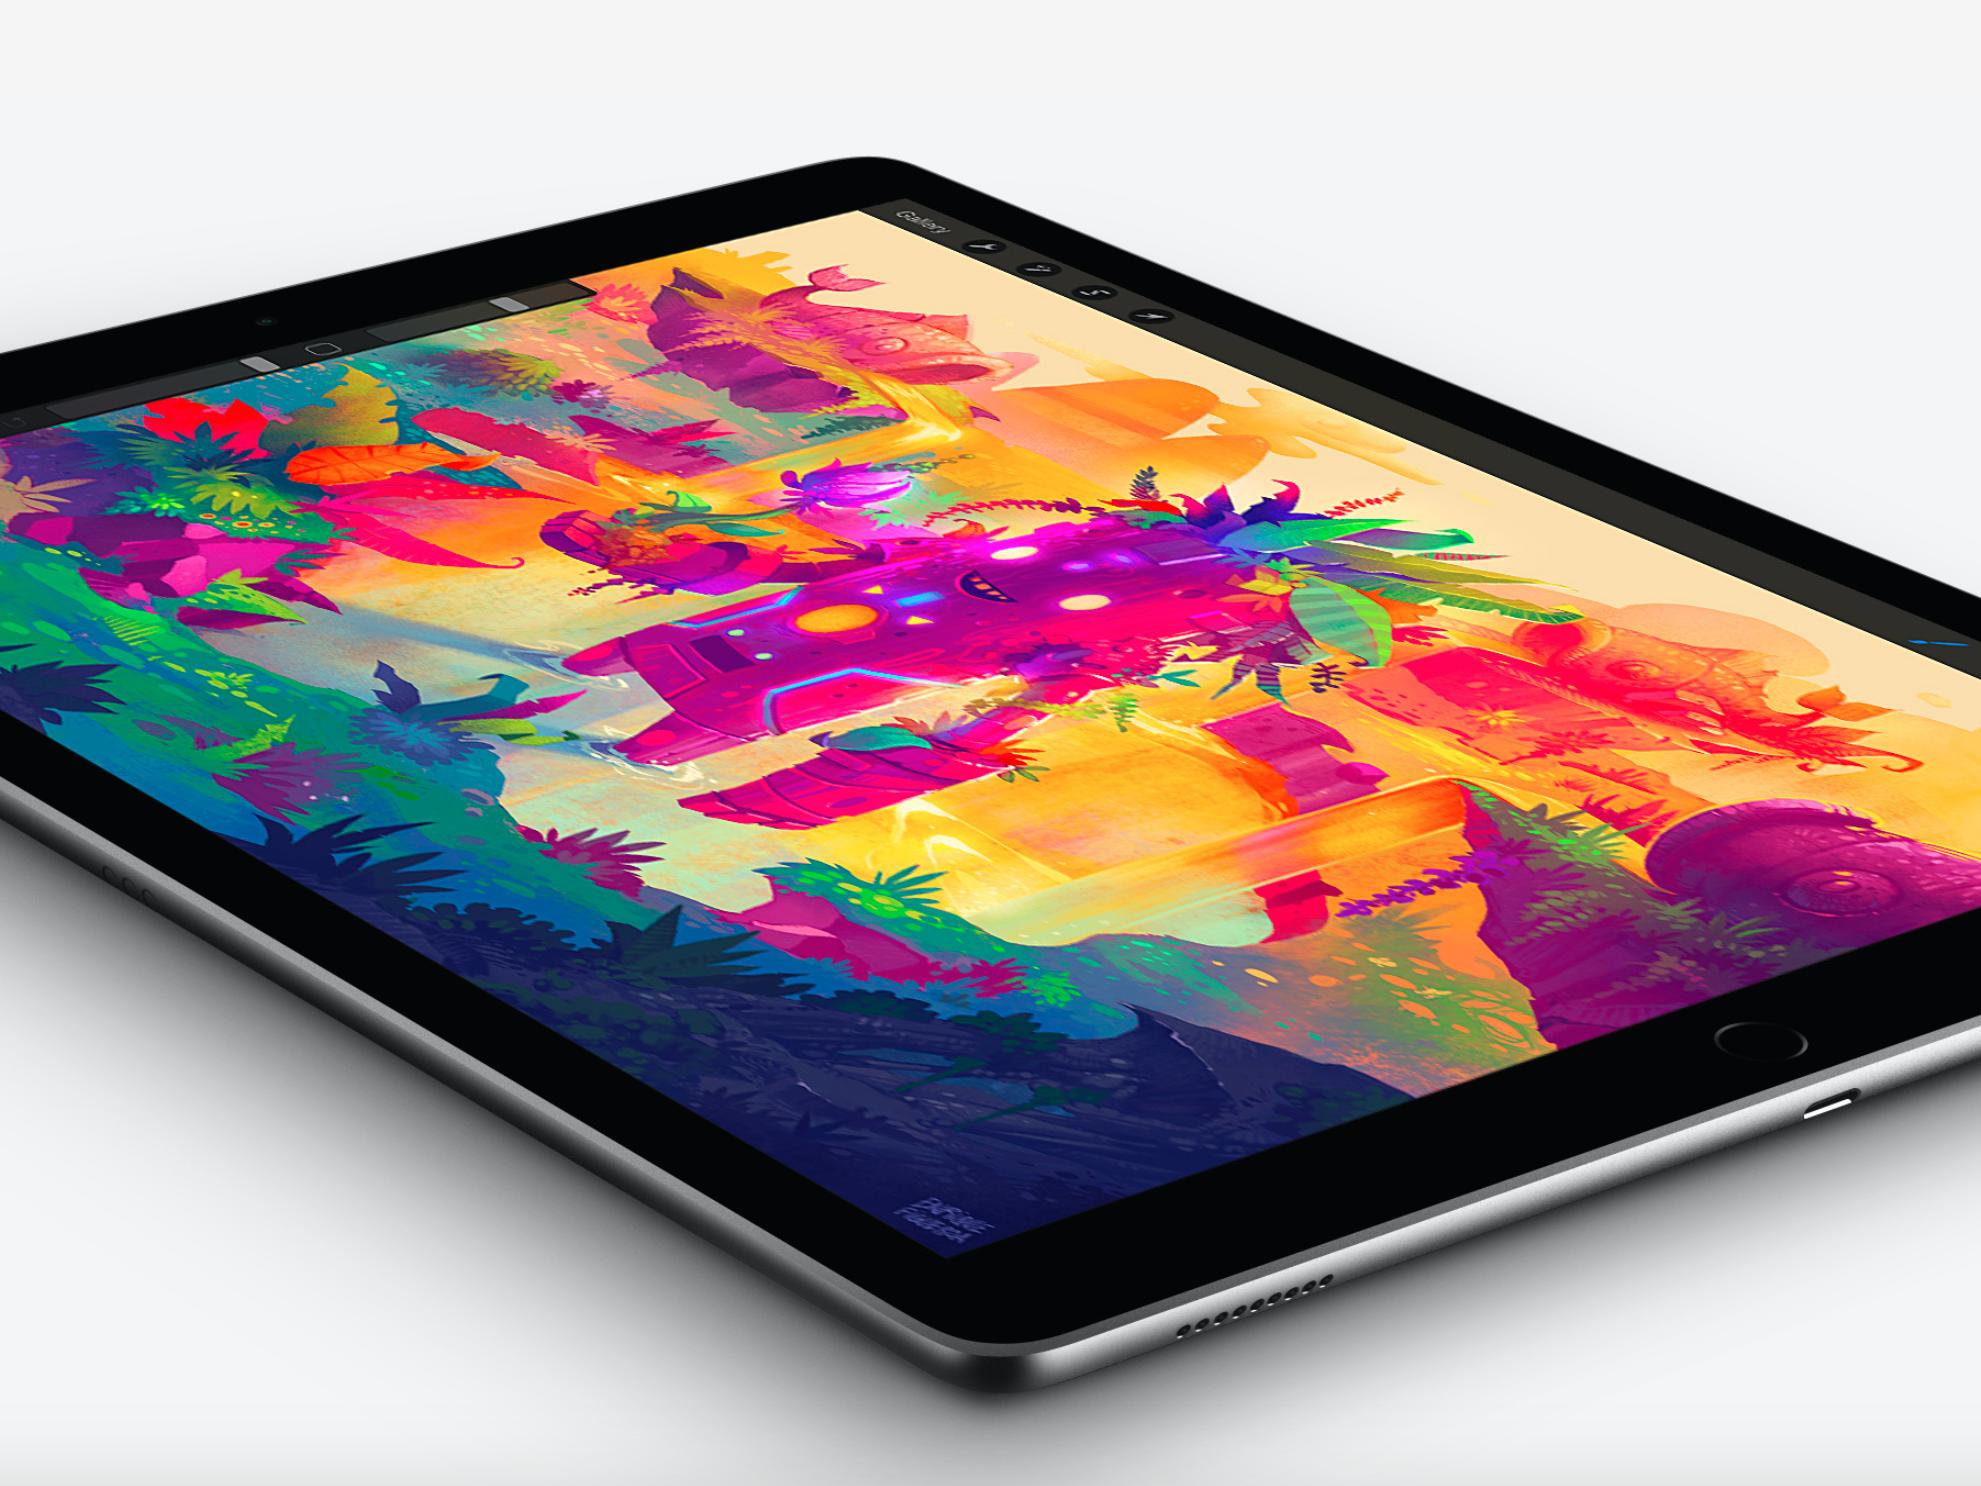 Procreate 5 for iPad is available now, releasing hundreds of new features |  iMore